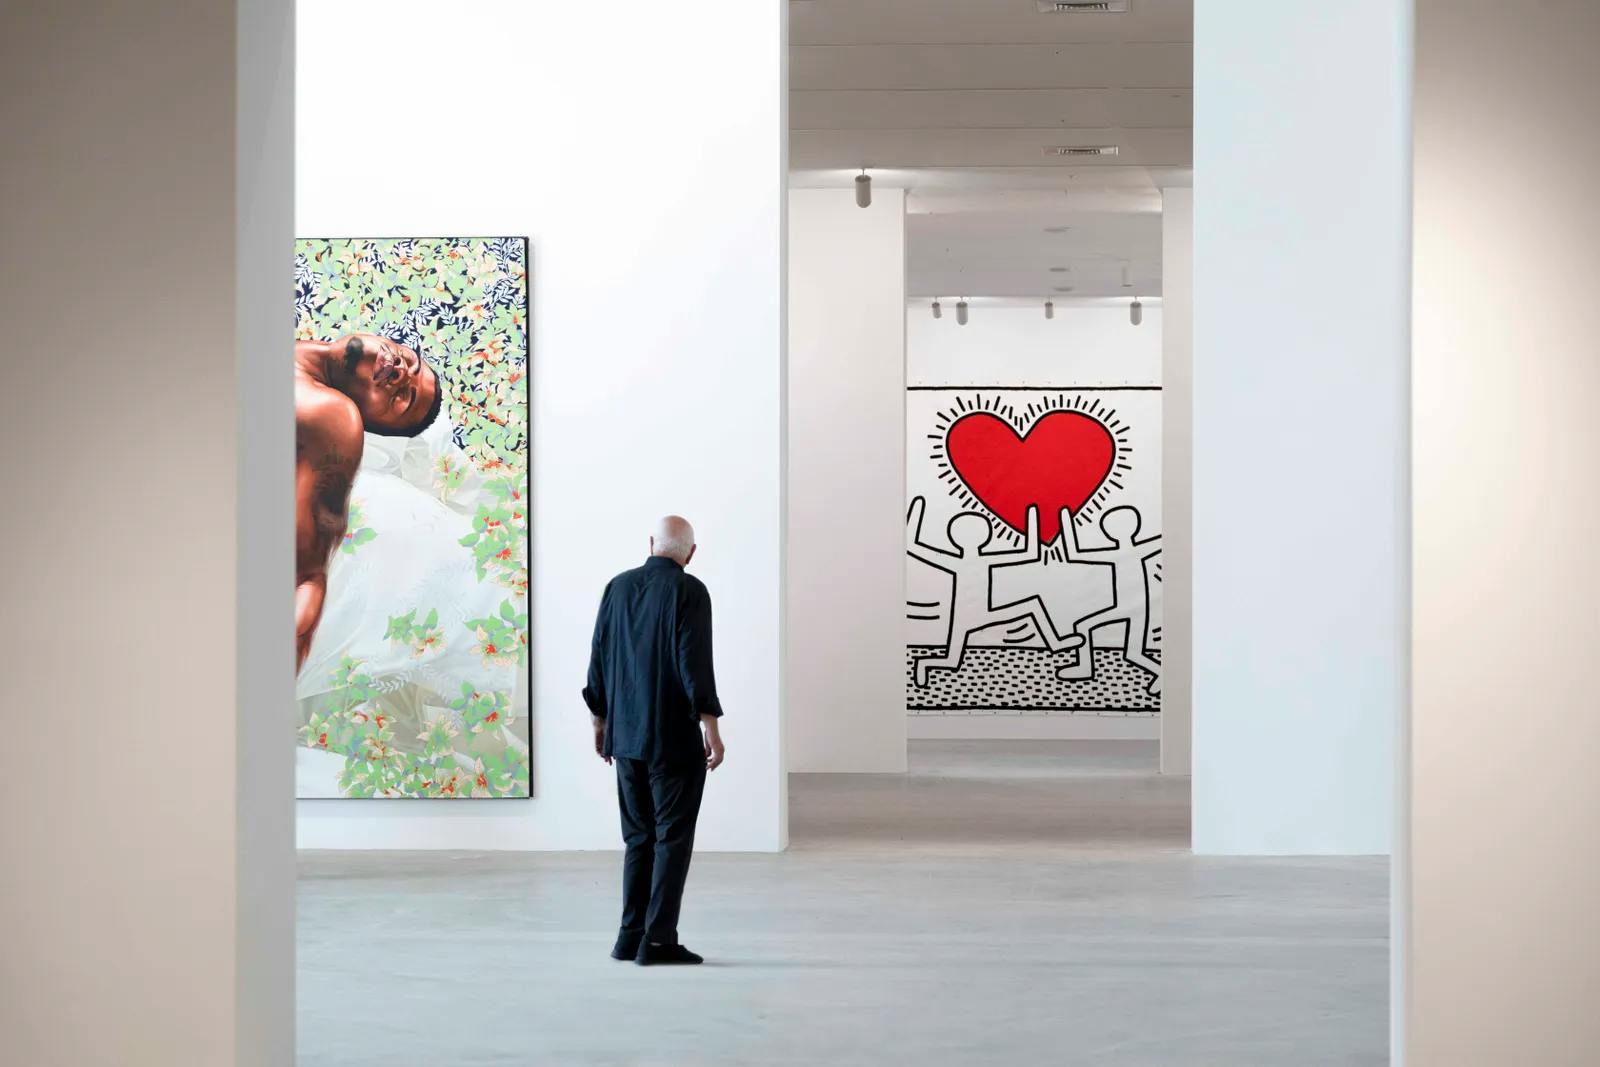 Don Rubell with Sleep (2008) by Kehinde Wiley, and Untitled (1981) by Keith Haring.